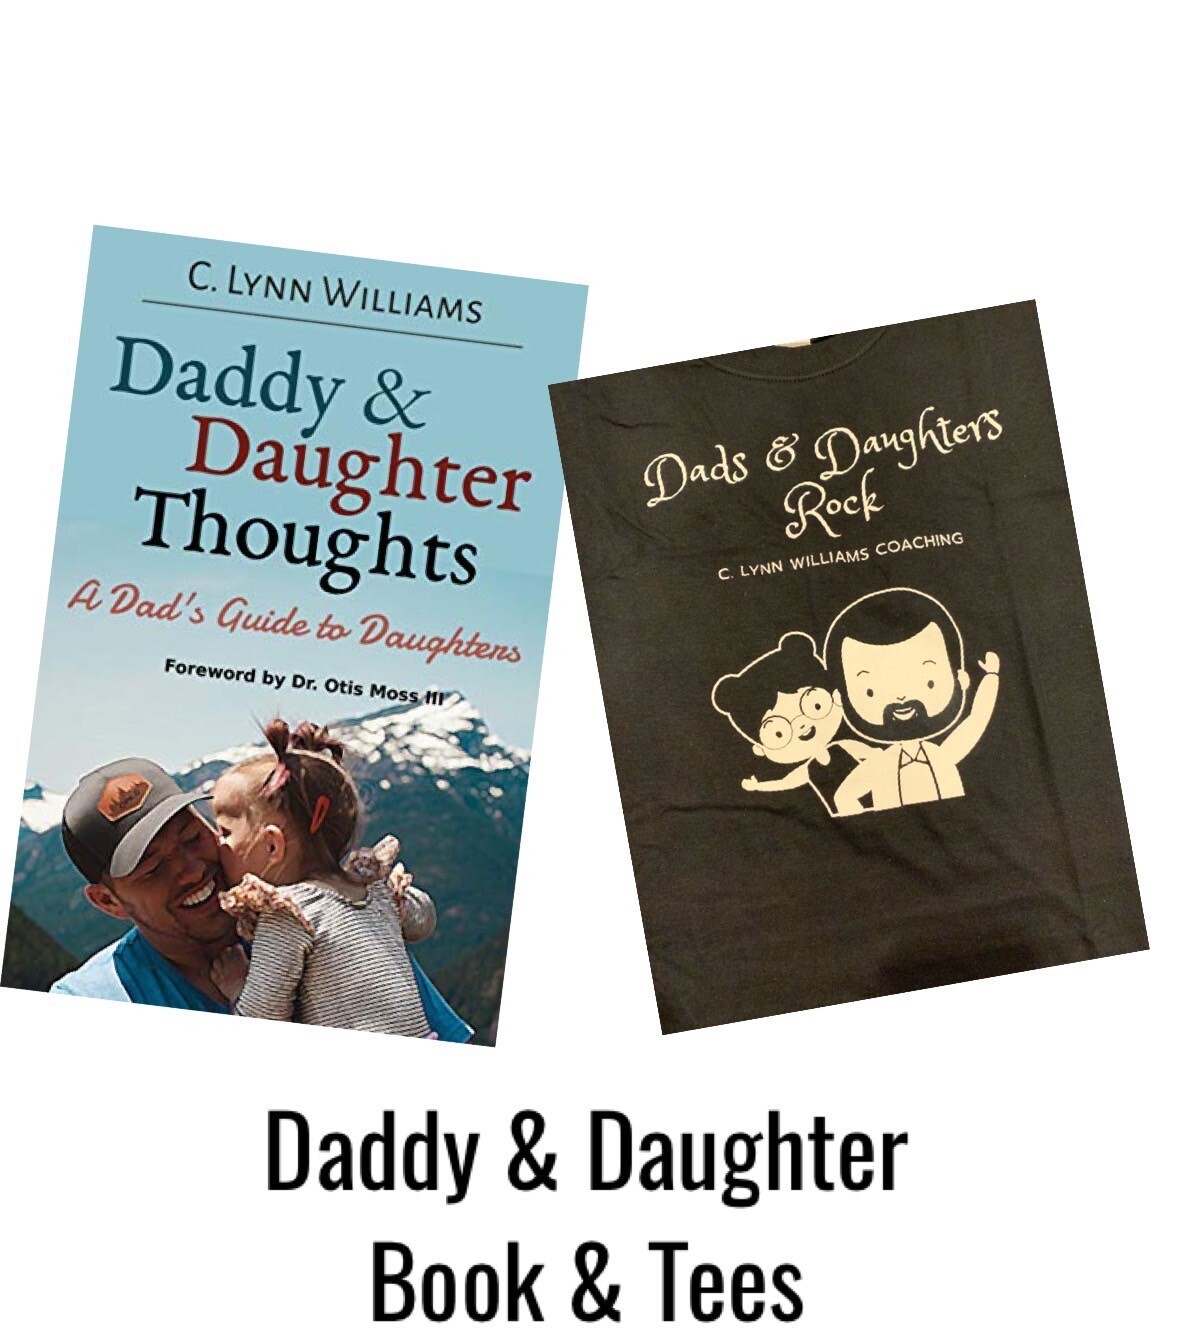 Daddy & Daughter Thoughts Black Friday Deal!